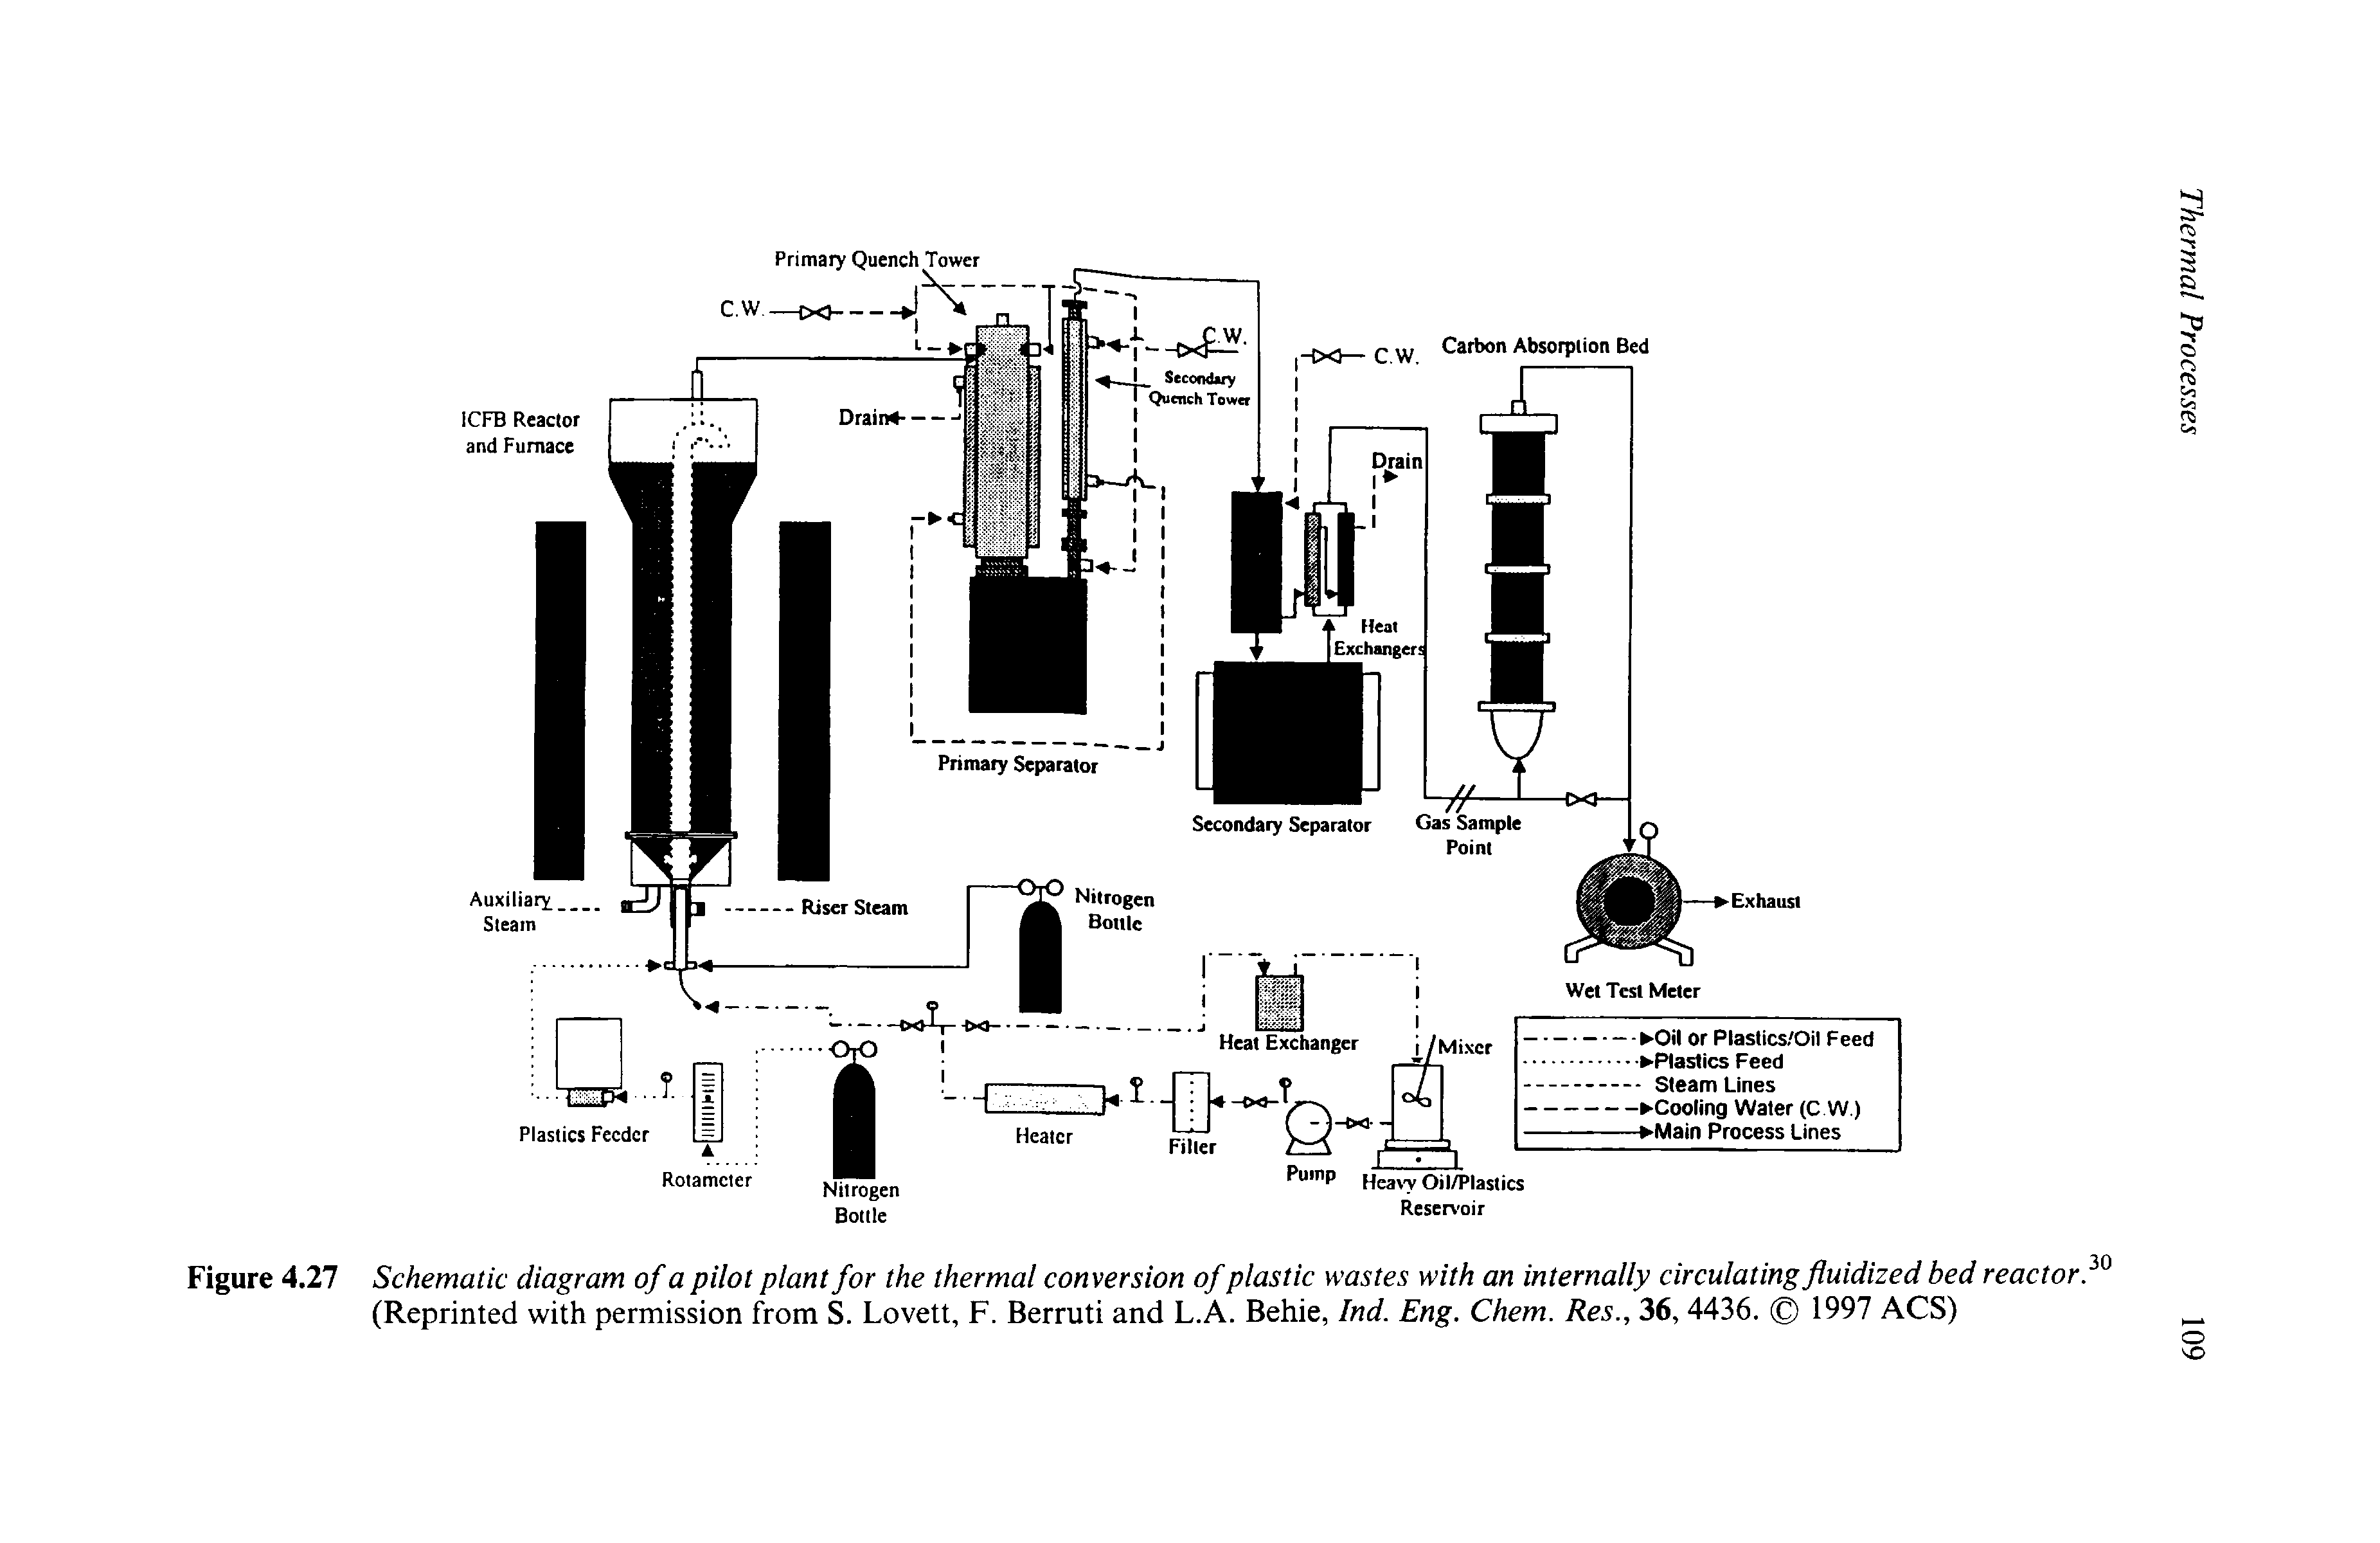 Schematic diagram of a pilot plant for the thermal conversion of plastic wastes with an internally circulating fluidized bed reactor.30...